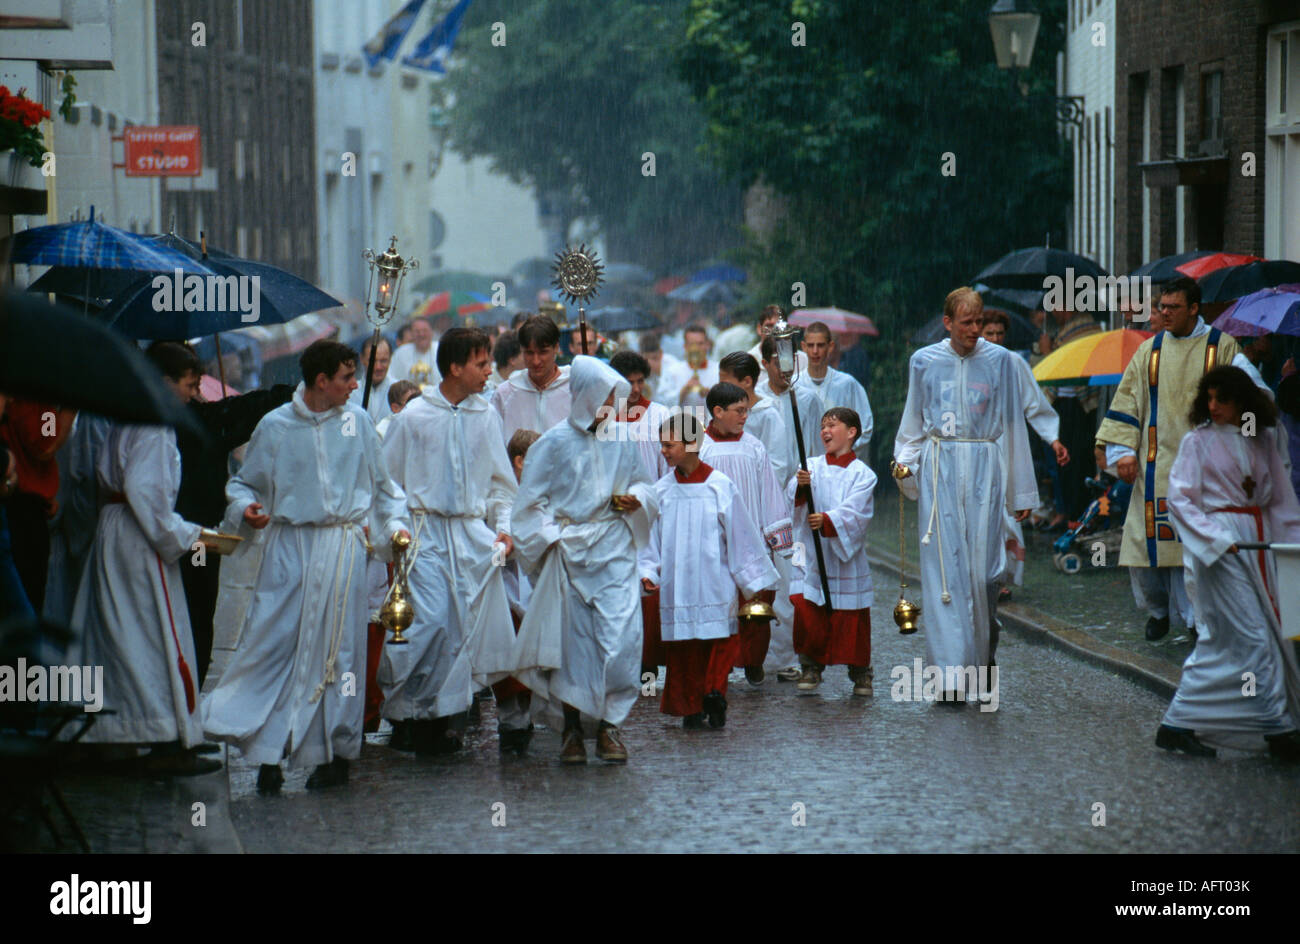 Netherlands Maastricht People in religious procession walking in rain Stock Photo